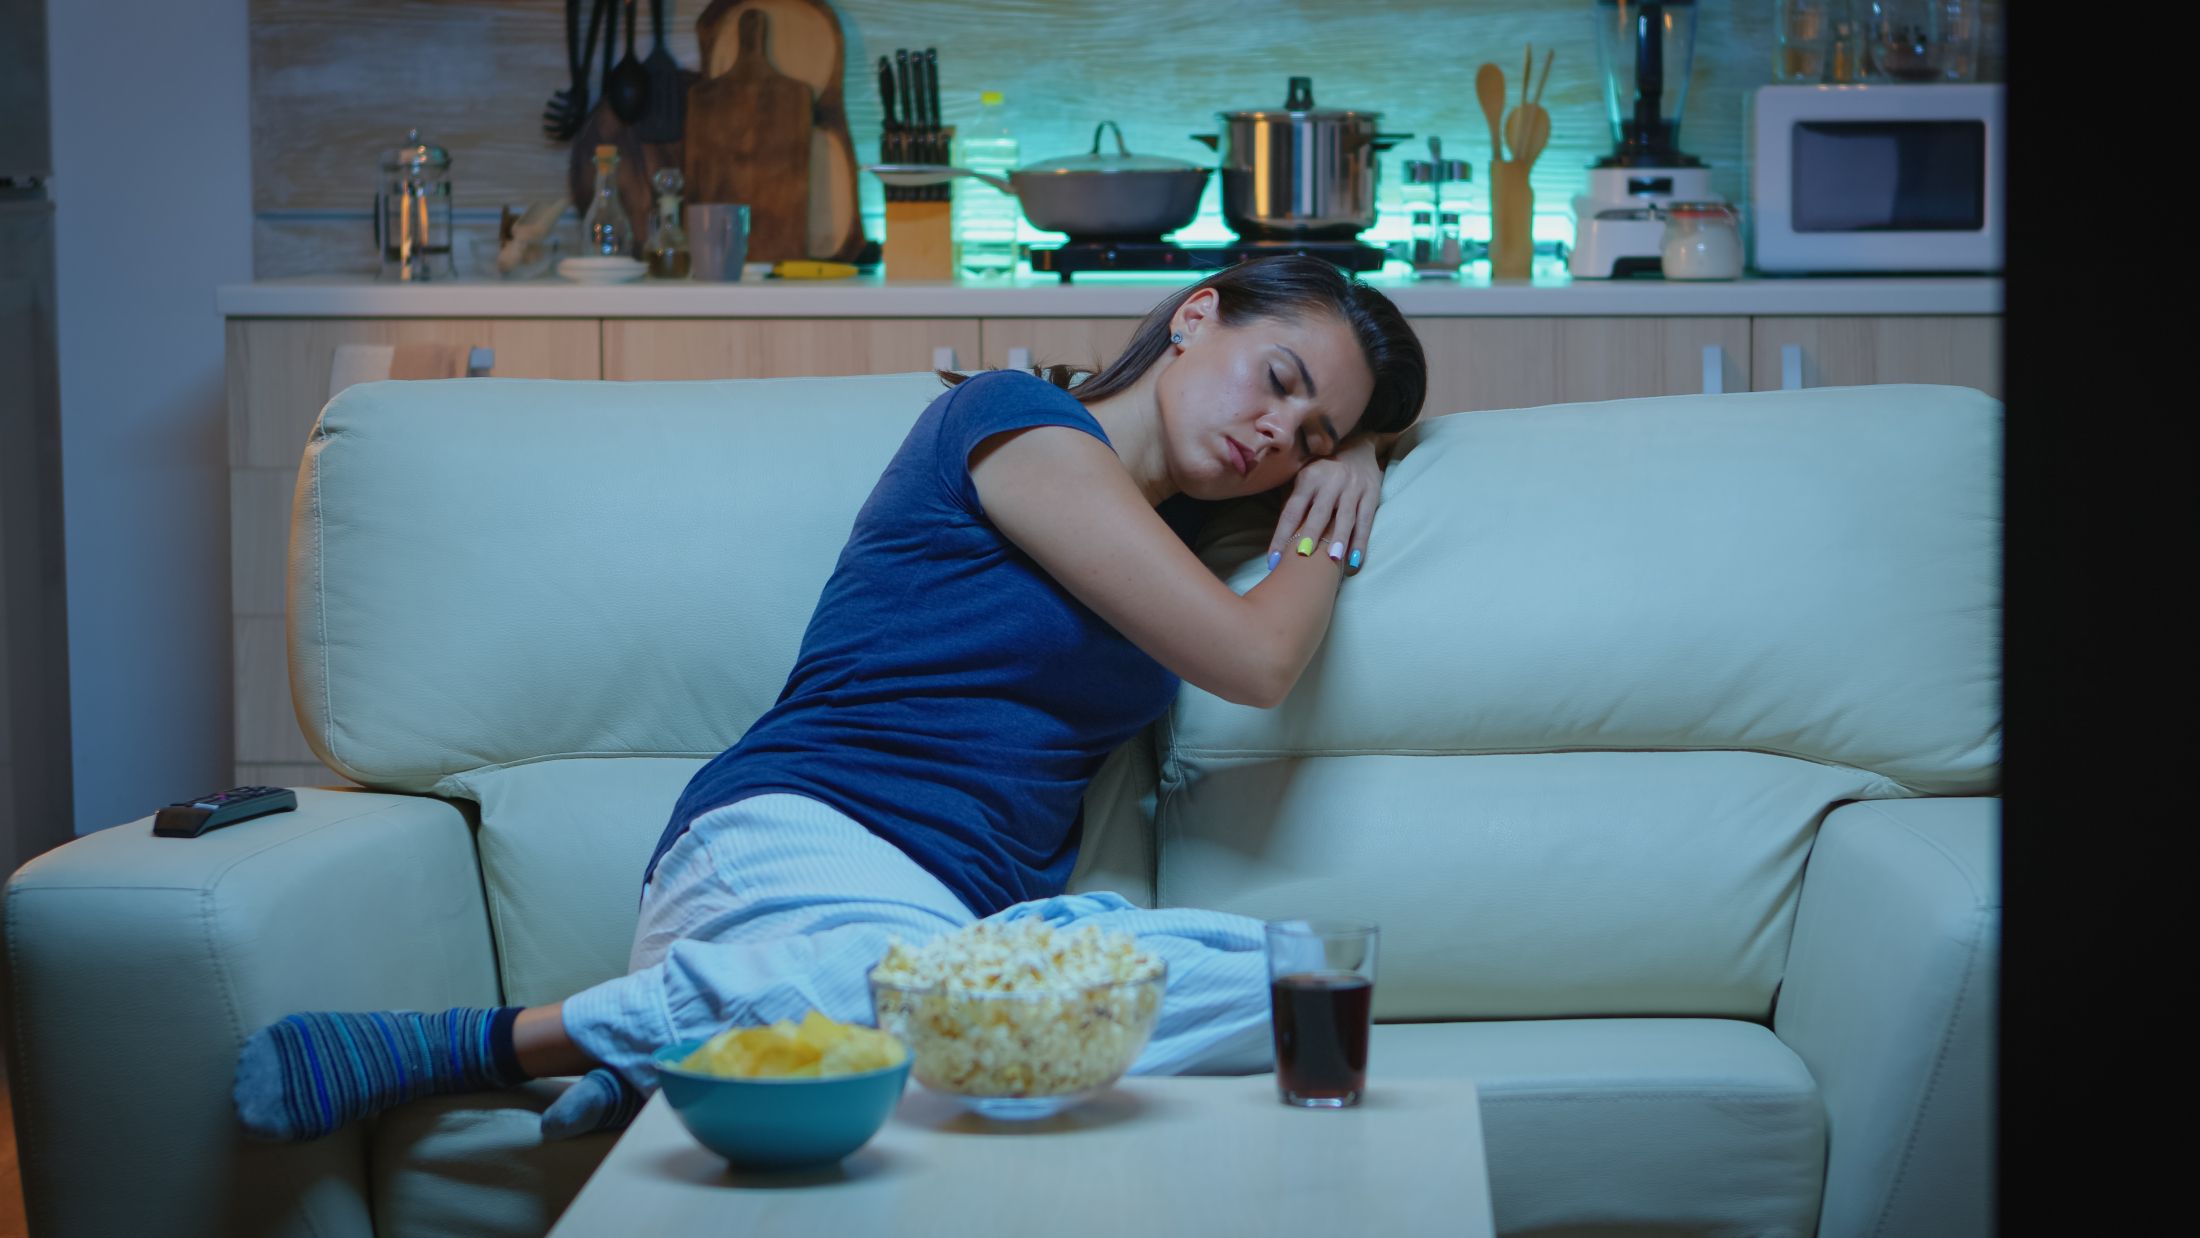 woman-sleeping-on-a-sofa-in-front-of-tv-while-watching-a-bored-movie-tired-exhausted-lonely-sleepy-lady-in-pajamas-falling-asleep-sitting-on-cozy-couch-in-living-room-closing-eyes-at-night.jpg